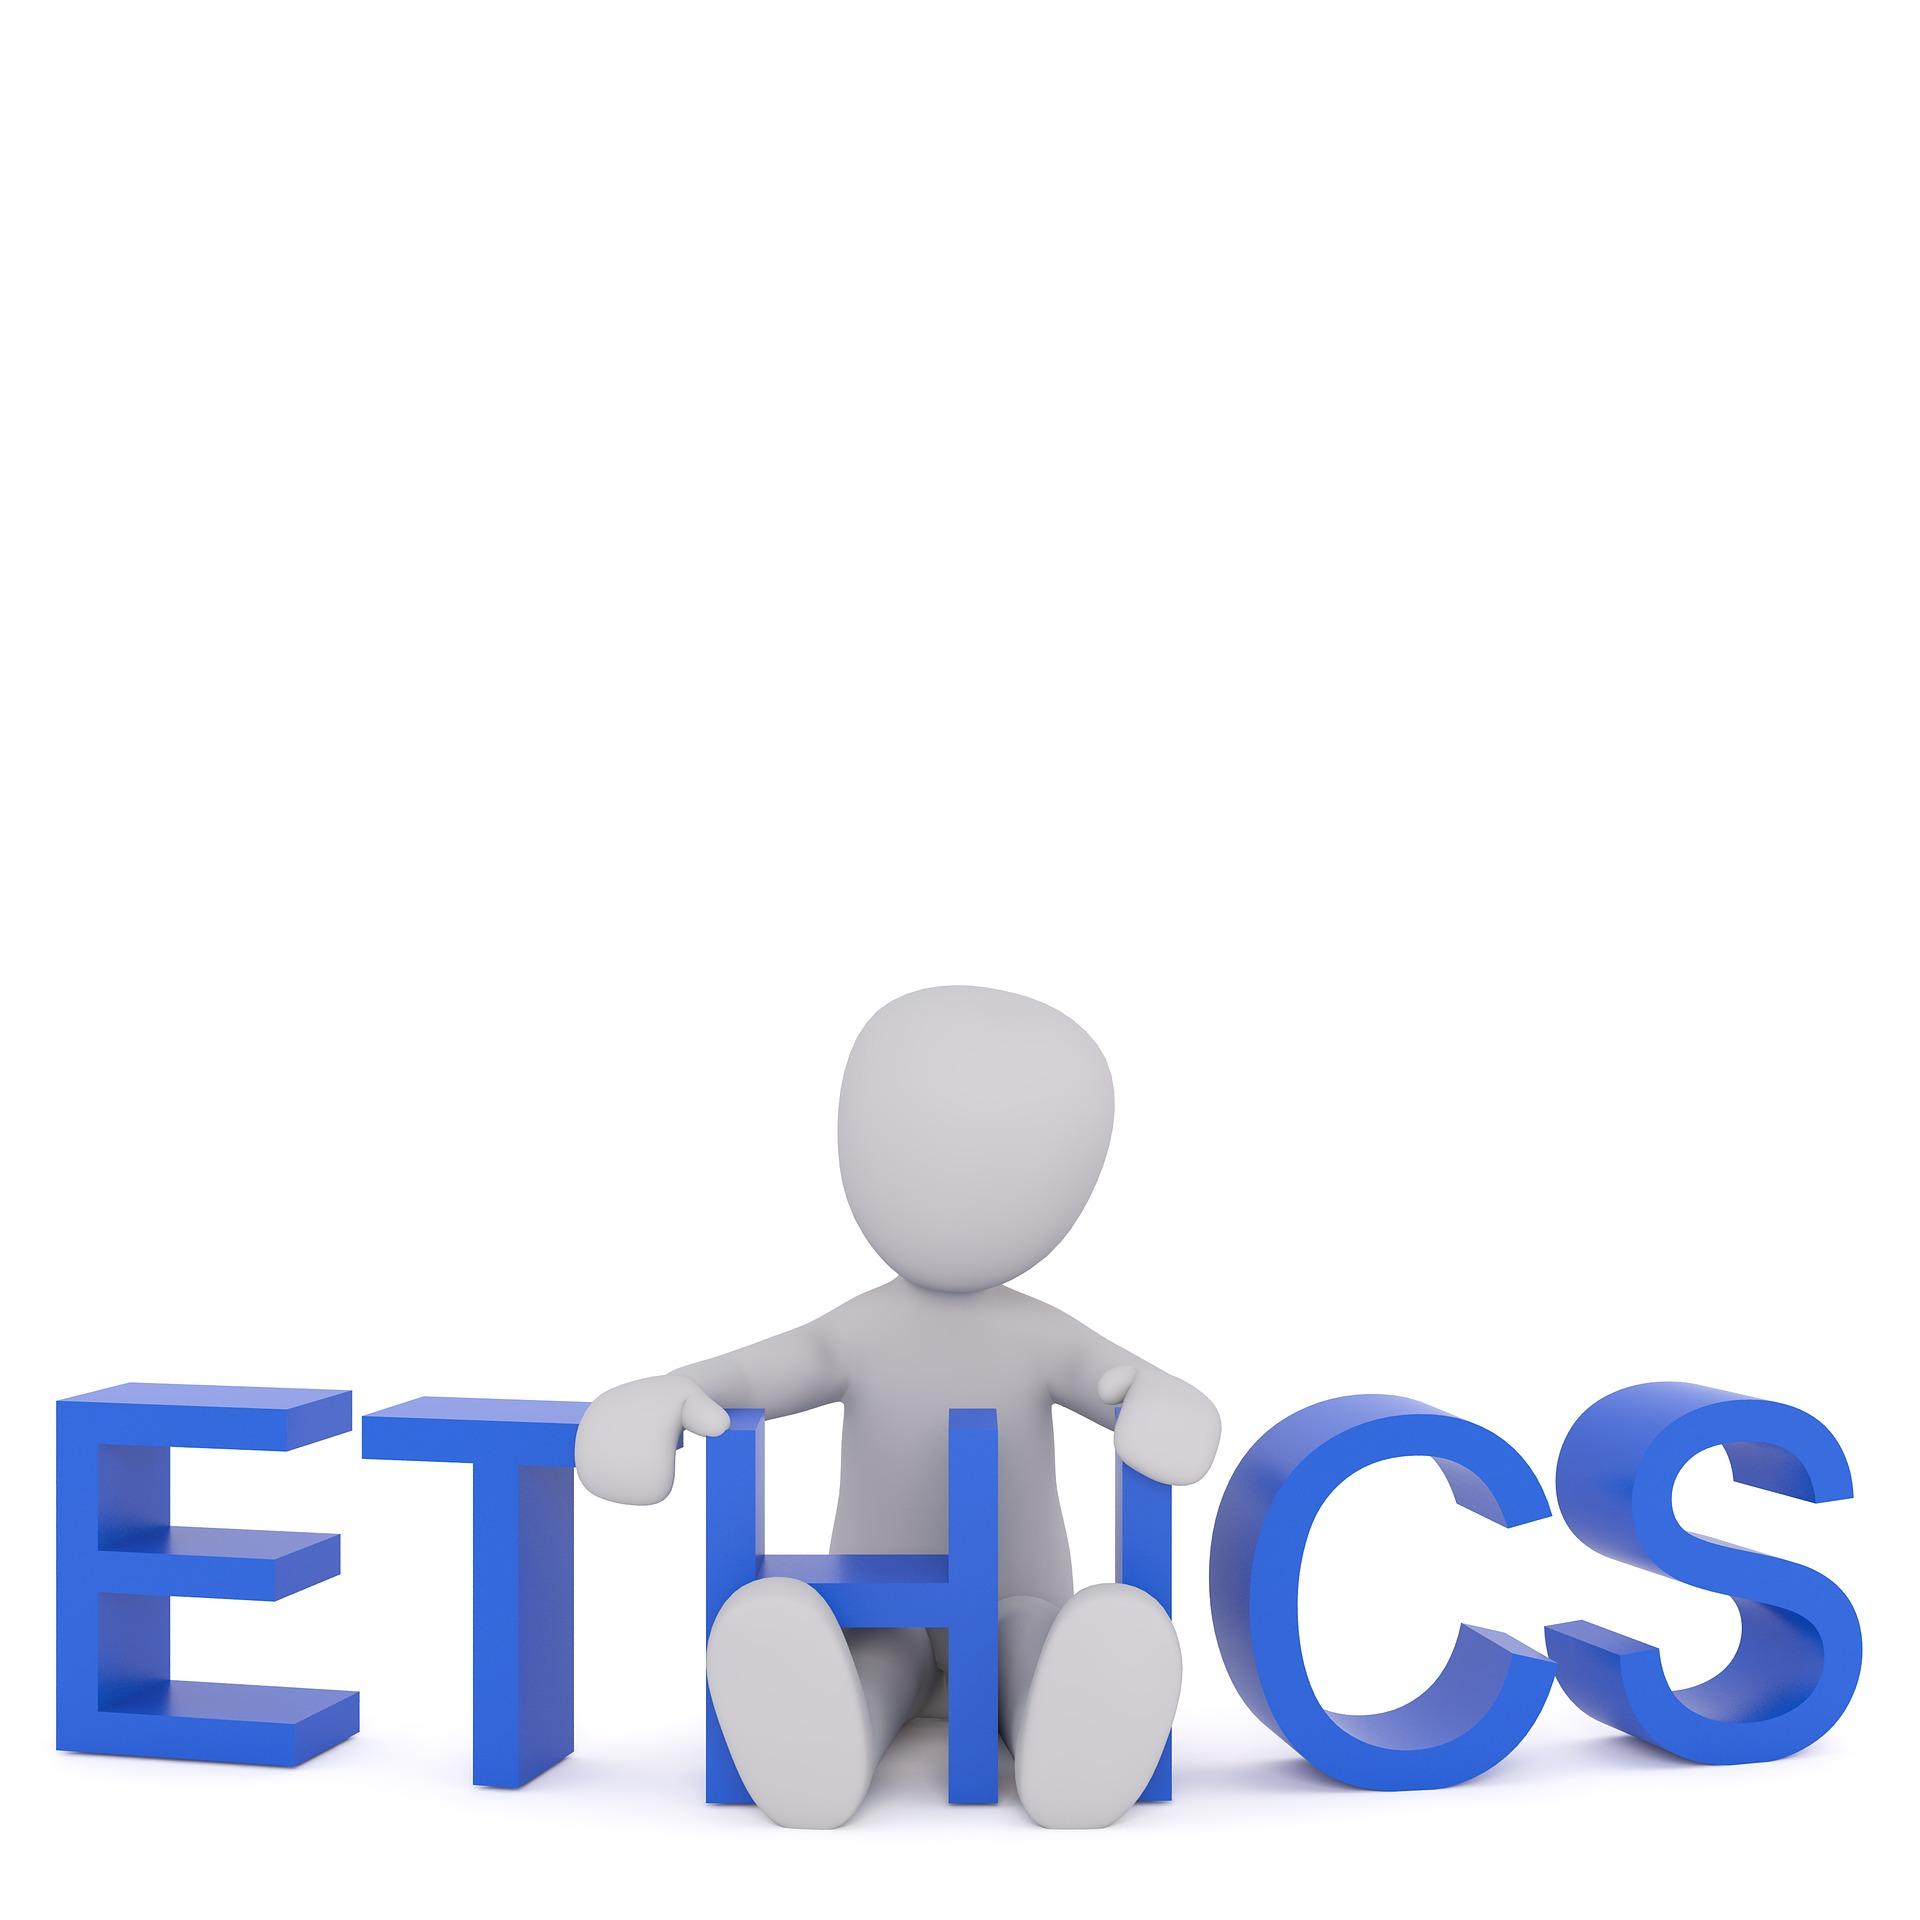 A figure sitting down holding a sign that says "Ethics".